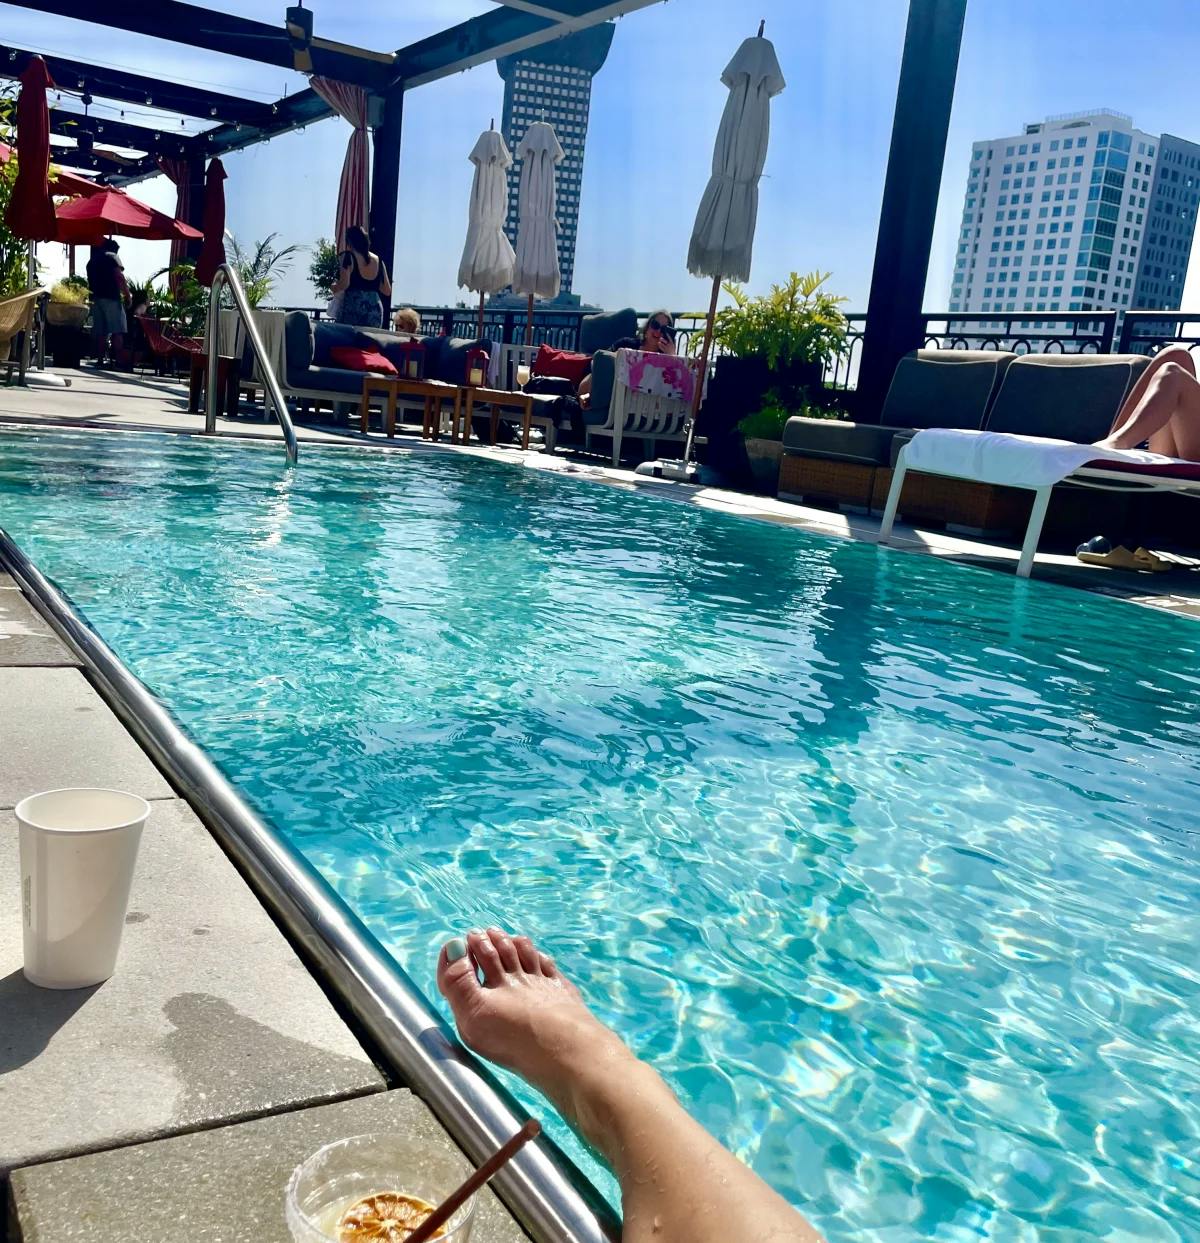 A pool on the roof with a cocktail in the foreground and buildings in the background.